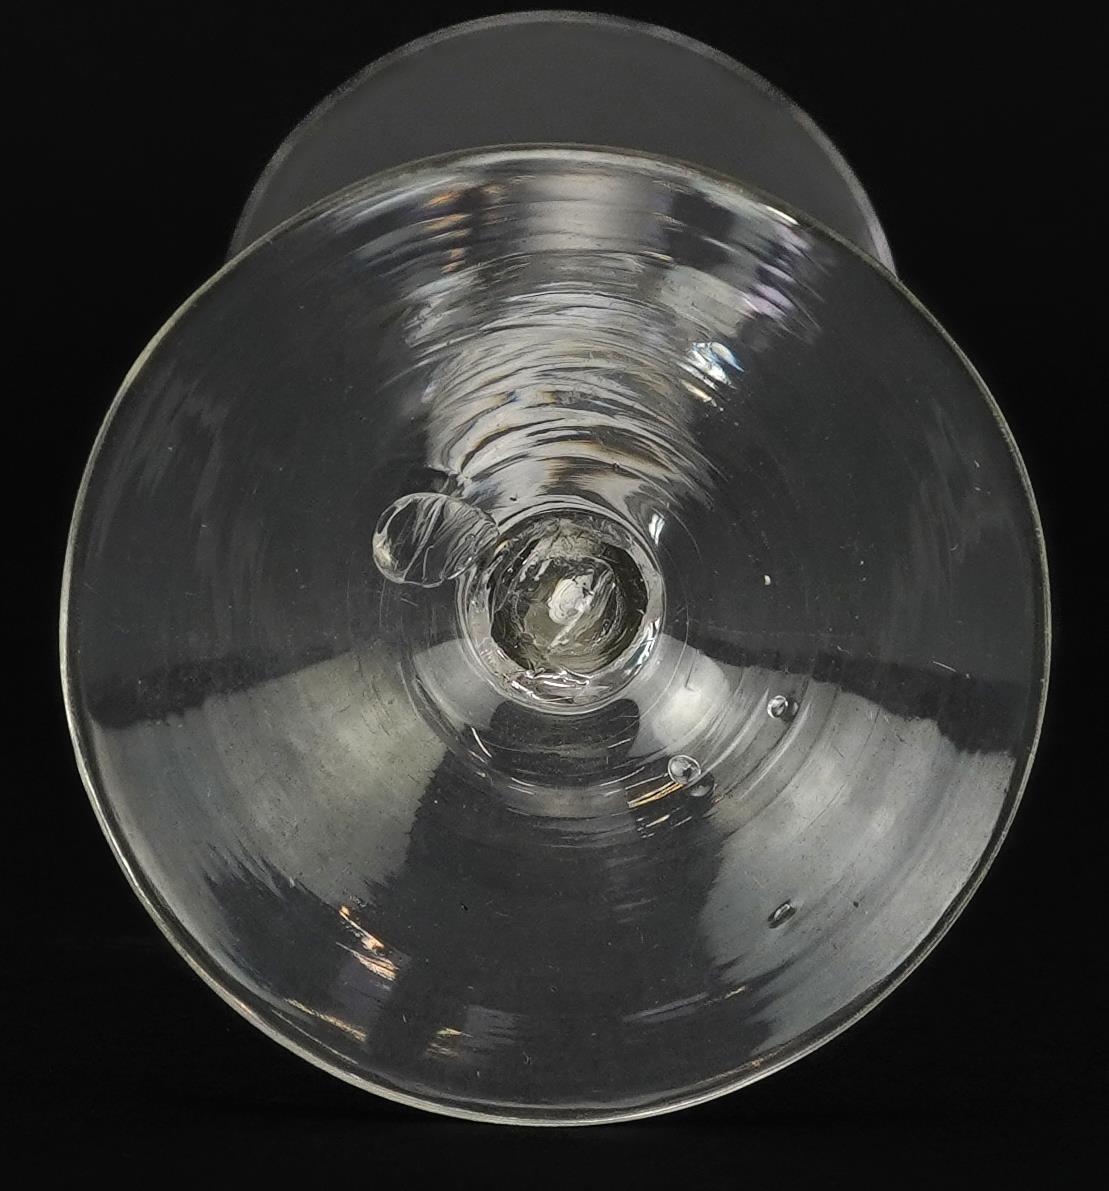 18th century wine glass with opaque twist stem, 18cm high - Image 4 of 4